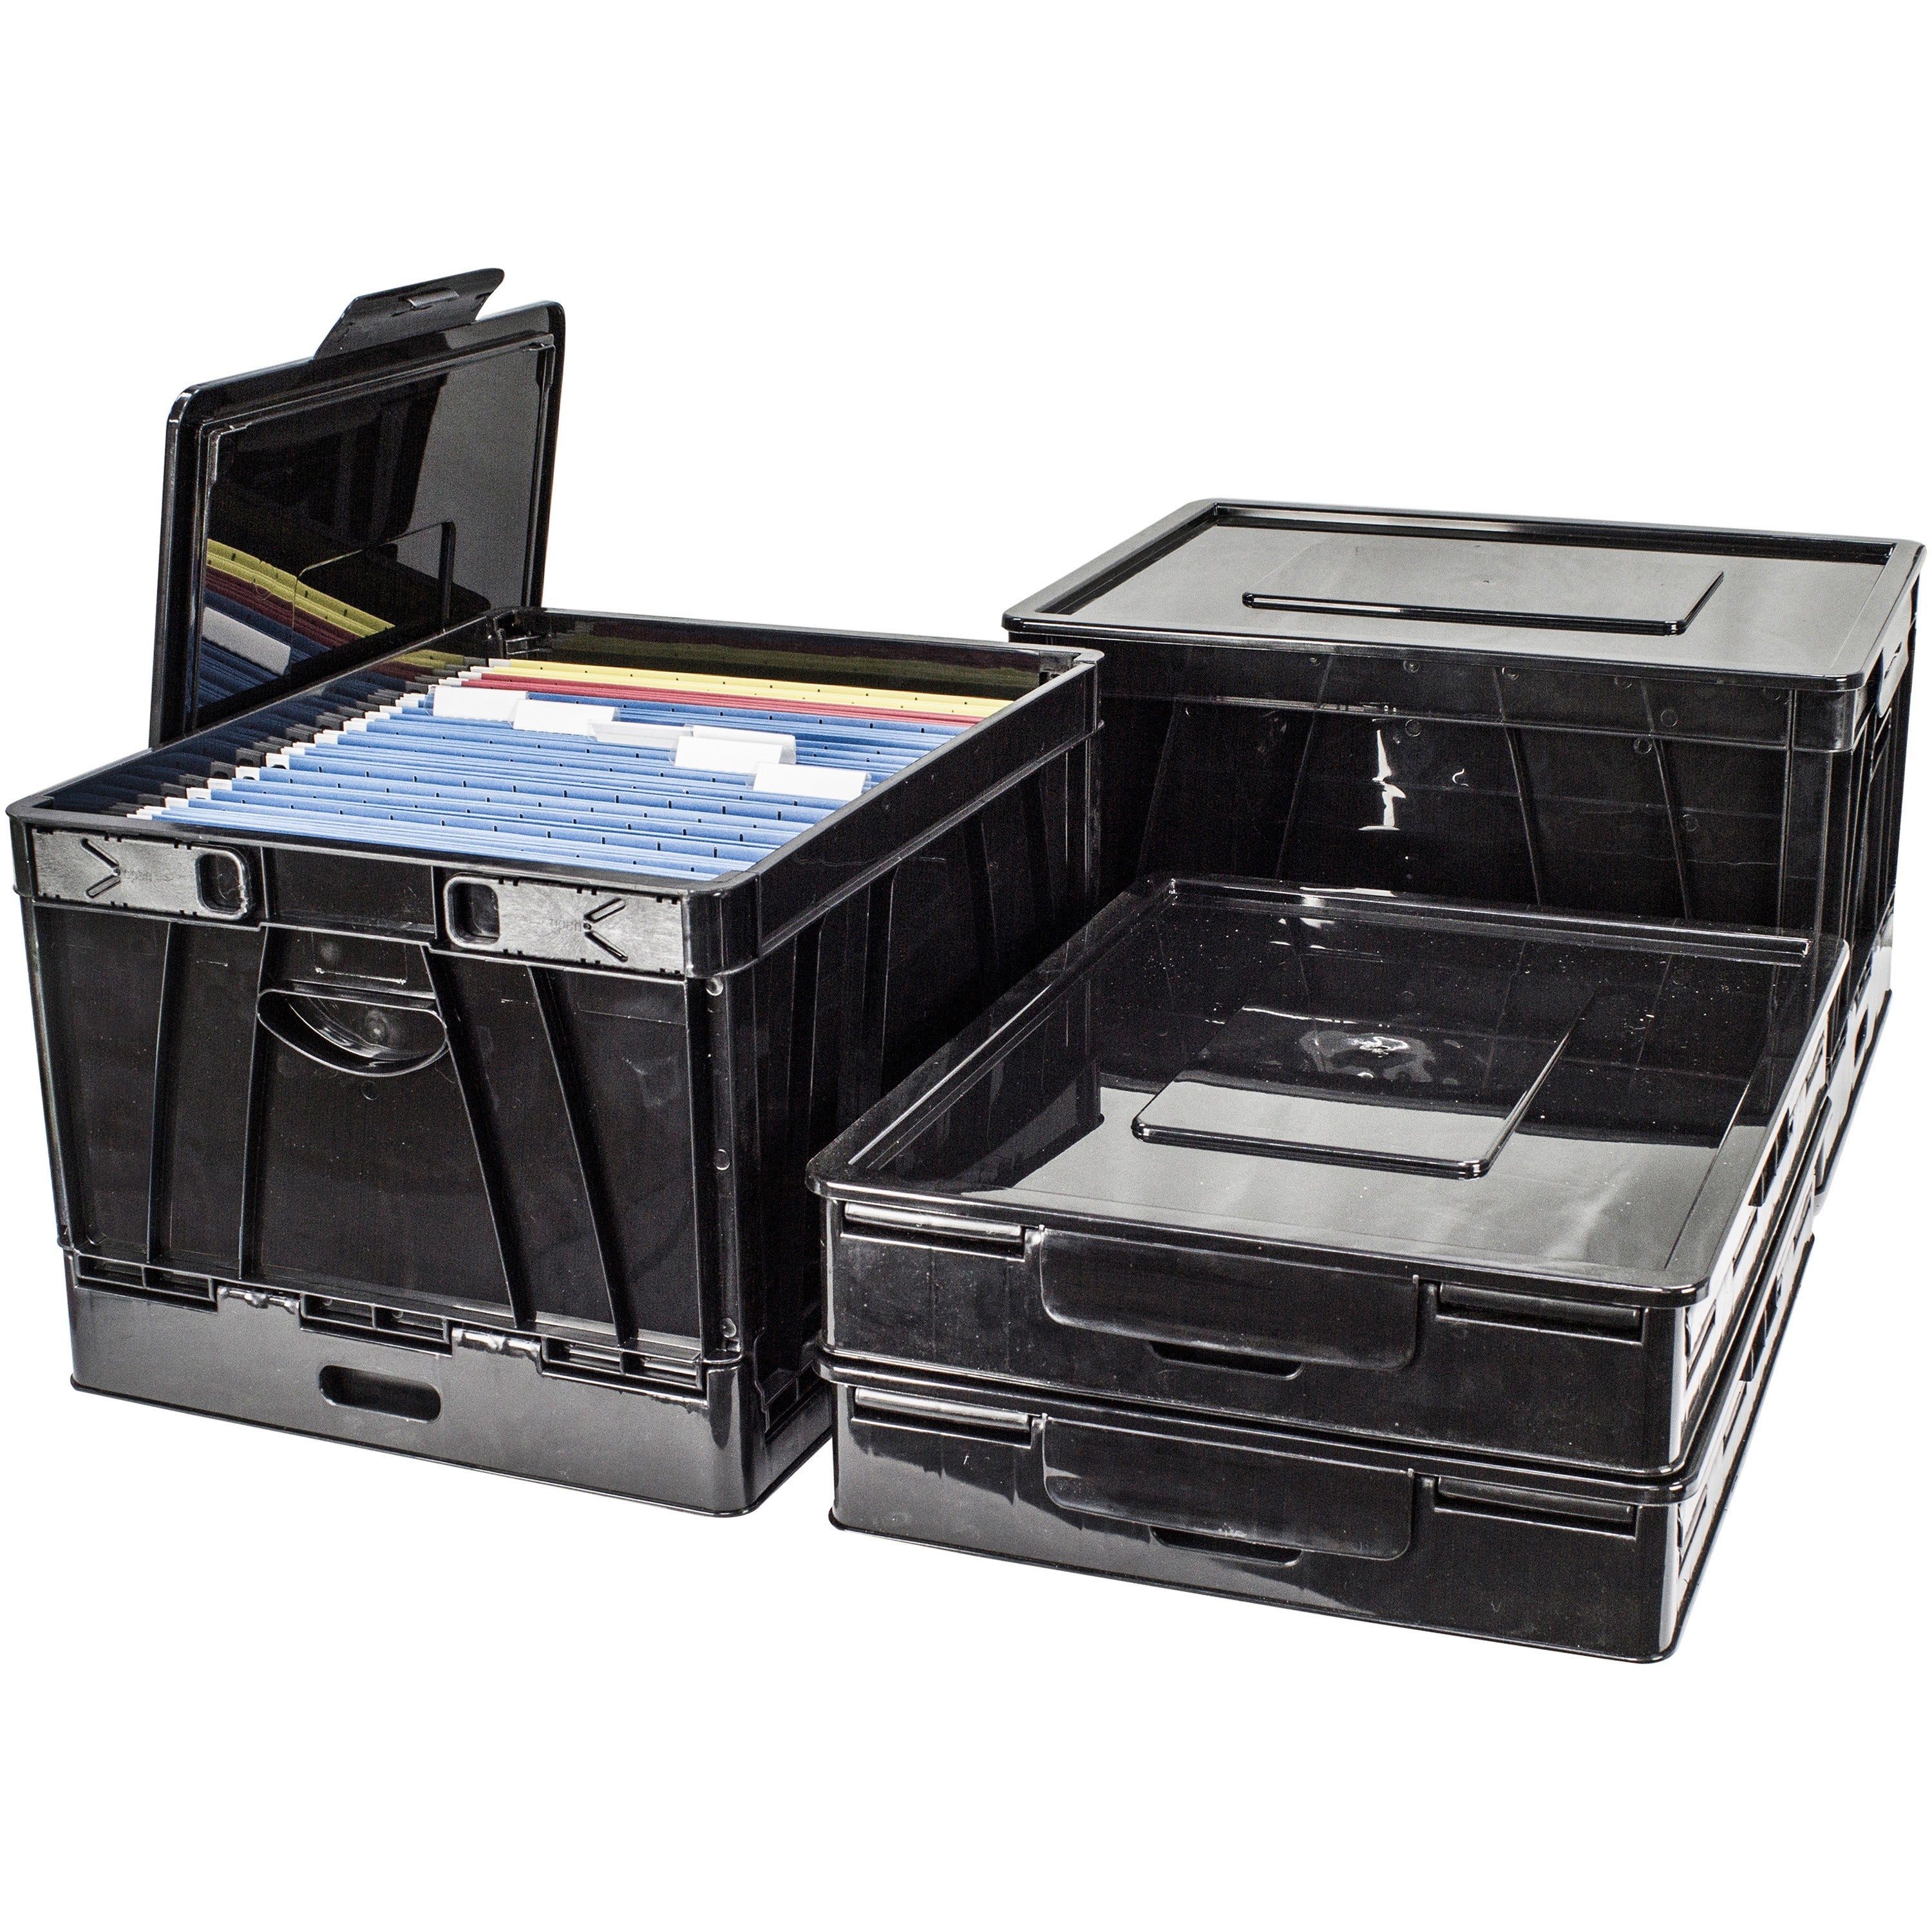 Storex Collapsible Storage Crate - External Dimensions: 14.3" Width x 17.3" Depth x 10.5"Height - 45 lb - 9.25 gal - Media Size Supported: Letter, Legal - Lid Lock Closure - Heavy Duty - Stackable - Plastic - Black - For File Folder, Letter, Document - 